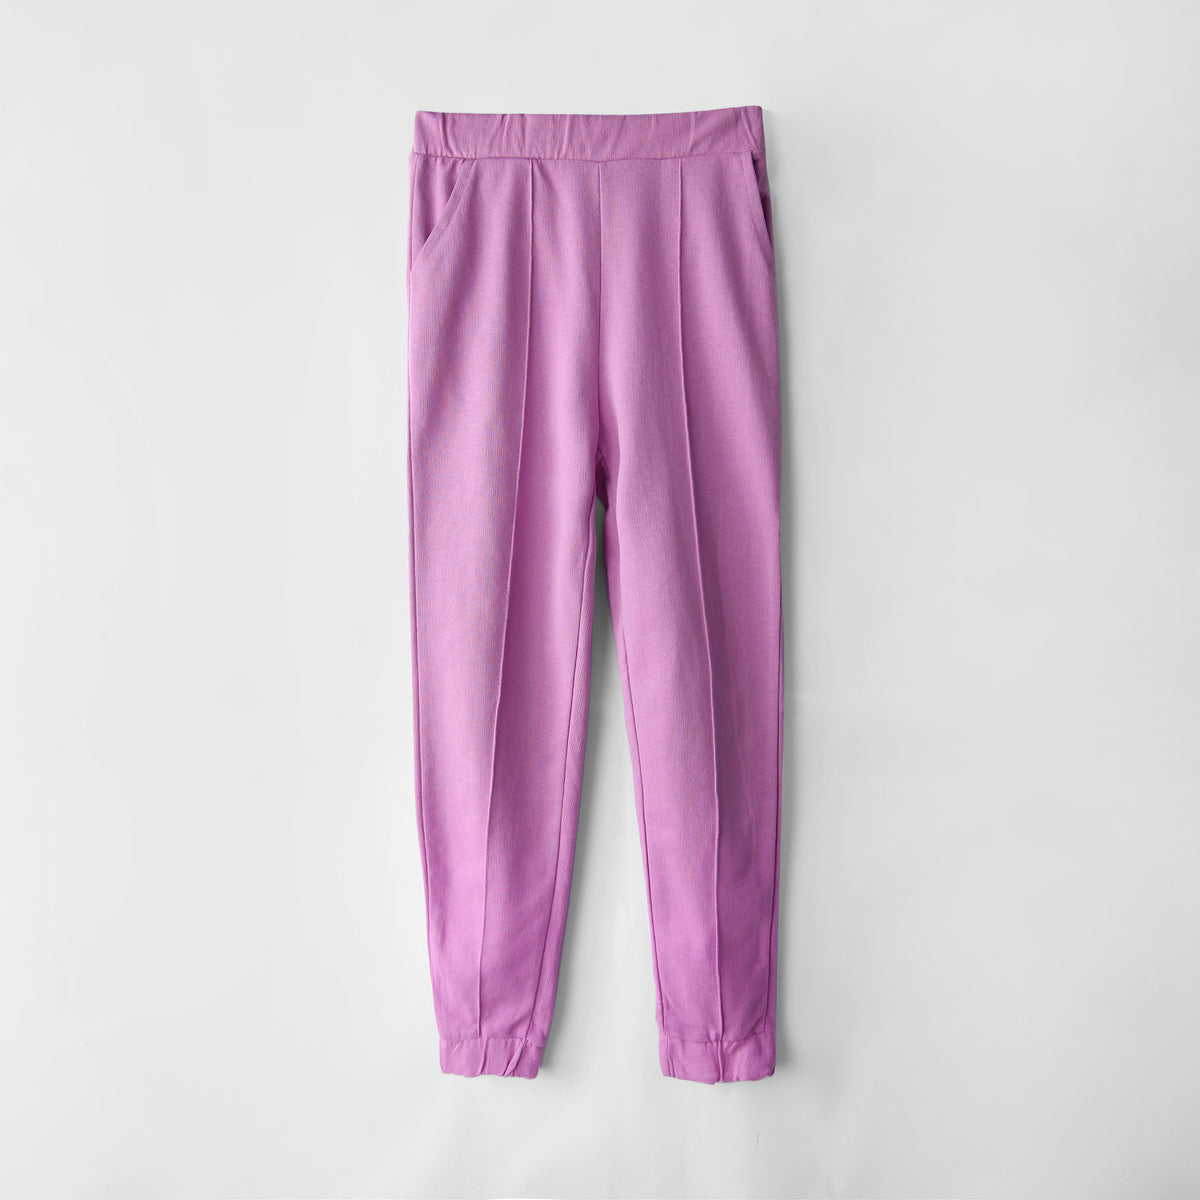 Premium Quality Soft Cotton Terry Trouser For Girls